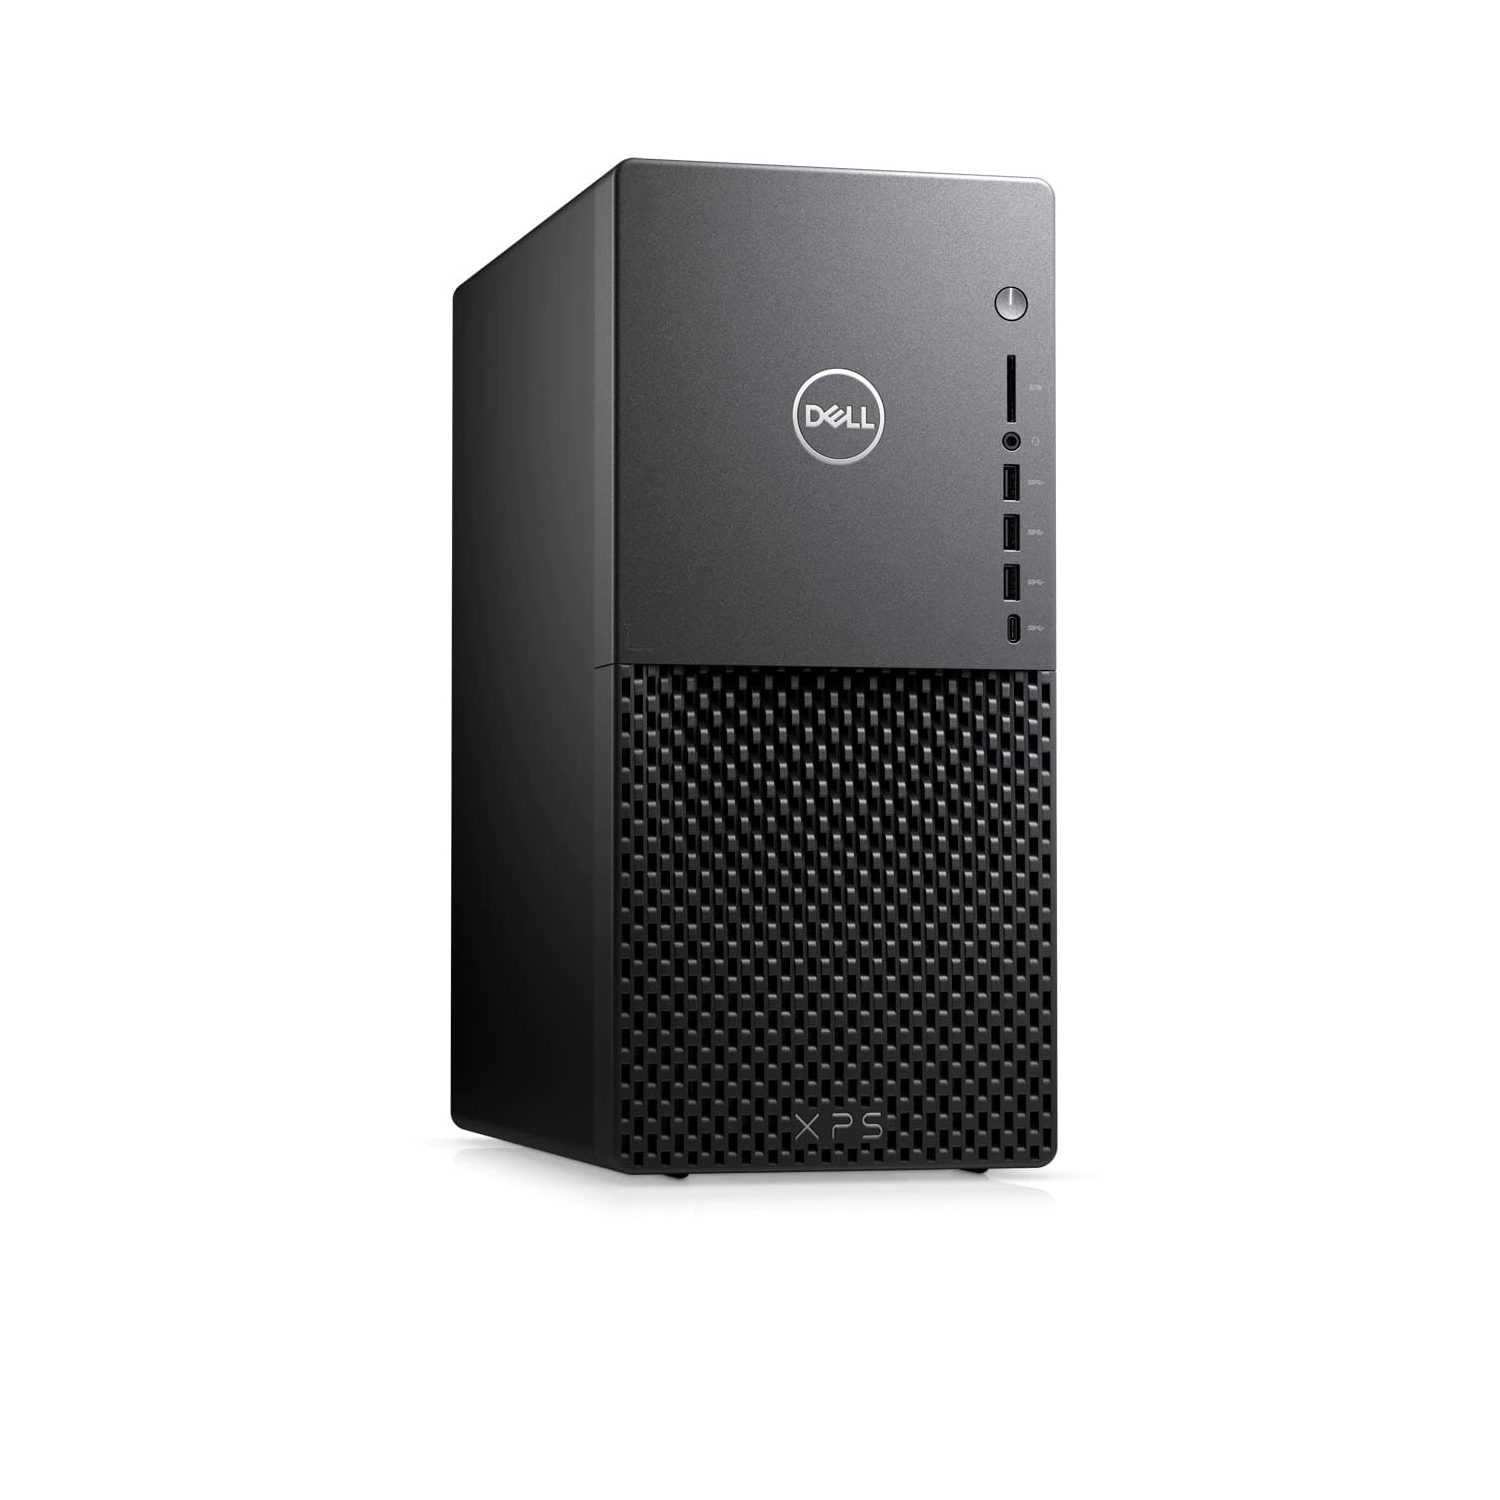 Refurbished (Excellent) - Dell XPS 8940 Desktop (2020) | Core i7 - 512GB SSD - 16GB RAM - RX 5600 | 8 Cores @ 4.8 GHz - 10th Gen CPU Certified Refurbished